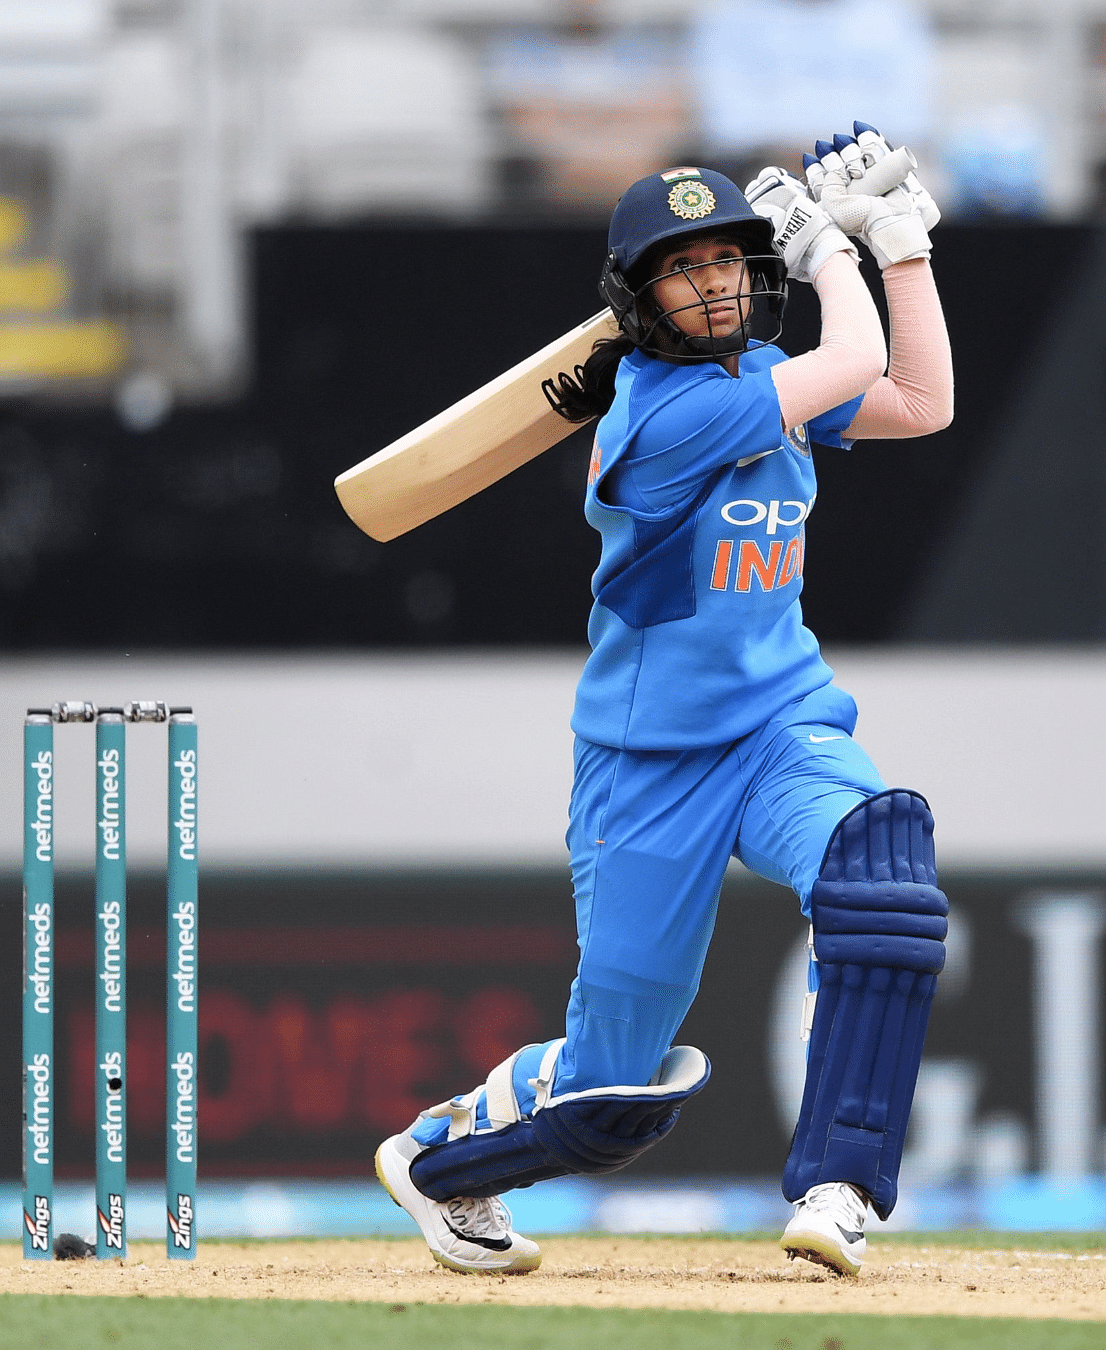 The Indian women’s cricket team lost by four wickets to New Zealand in the second T20 International.